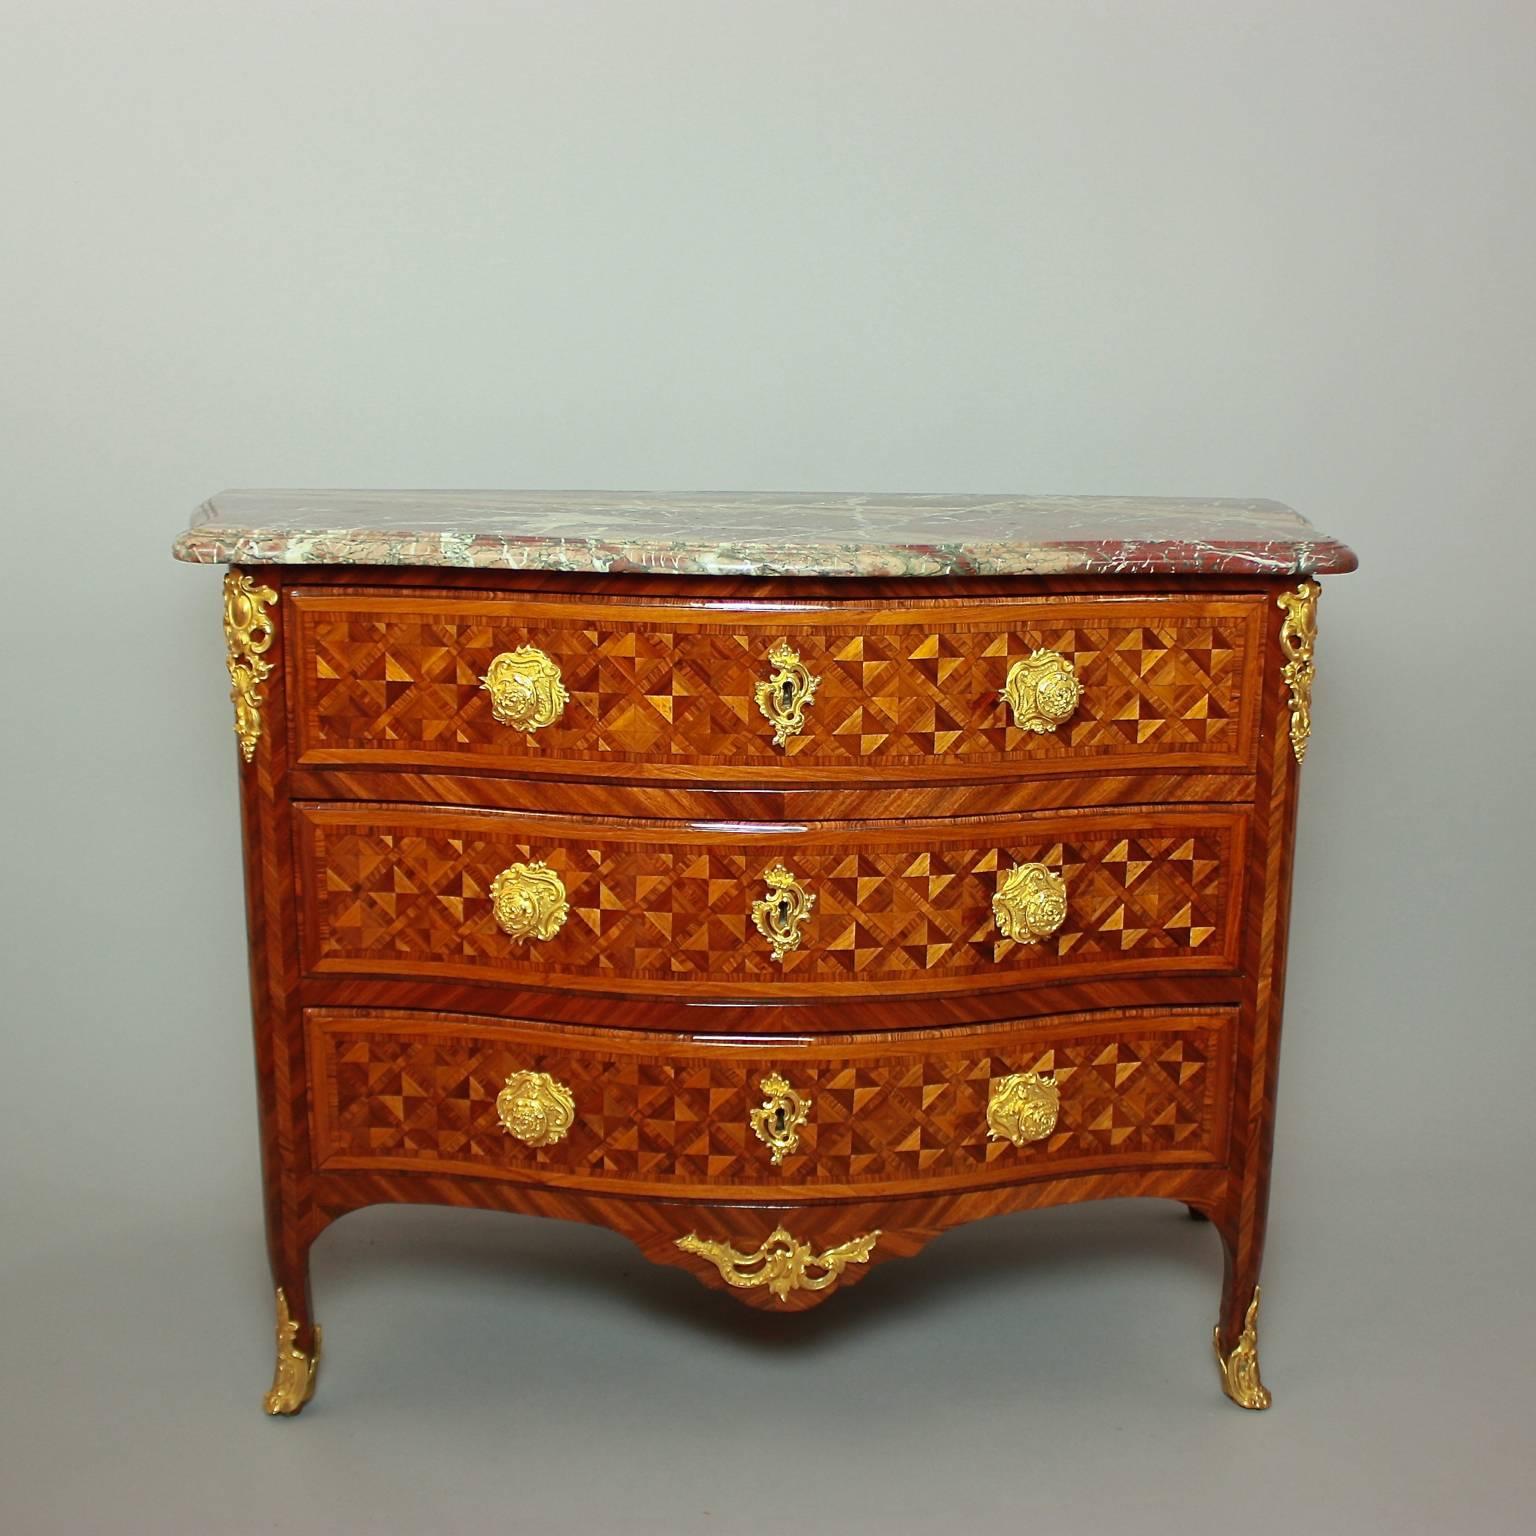 A fine Louis XV commode or chest of drawers stamped 'Mondon' (Francois Mondon, 1694- 1770). This commode with its three rows of drawers bears the maker's stamp of François Mondon (see photo) and is of characteristic rococo form. A marble top 'Campan